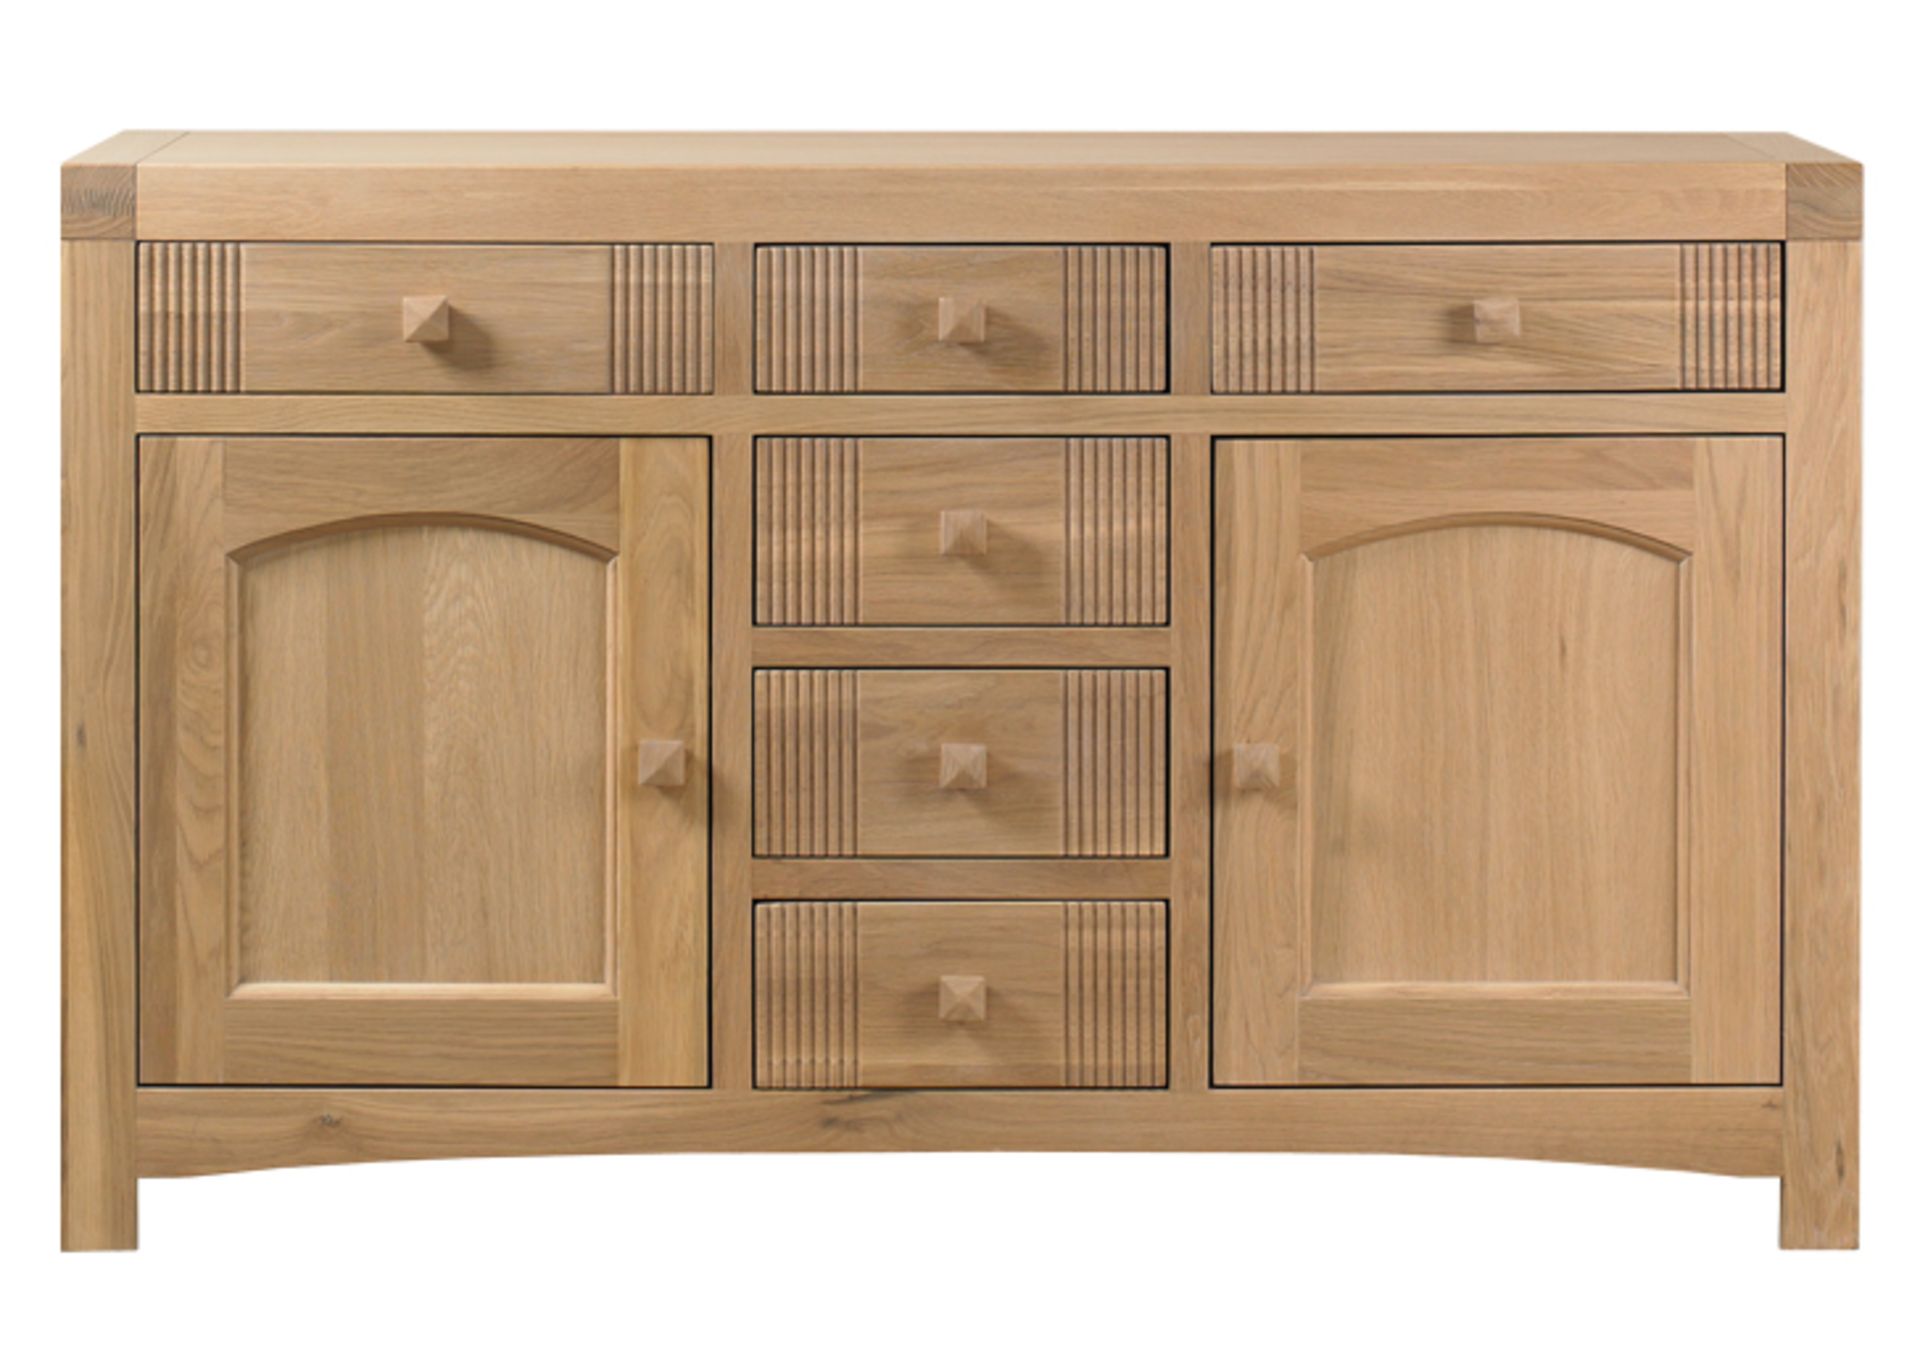 1 x Mark Webster Buckingham Large Sideboad  - Three Door/Three Drawer - White Wash Oak With a - Image 3 of 4